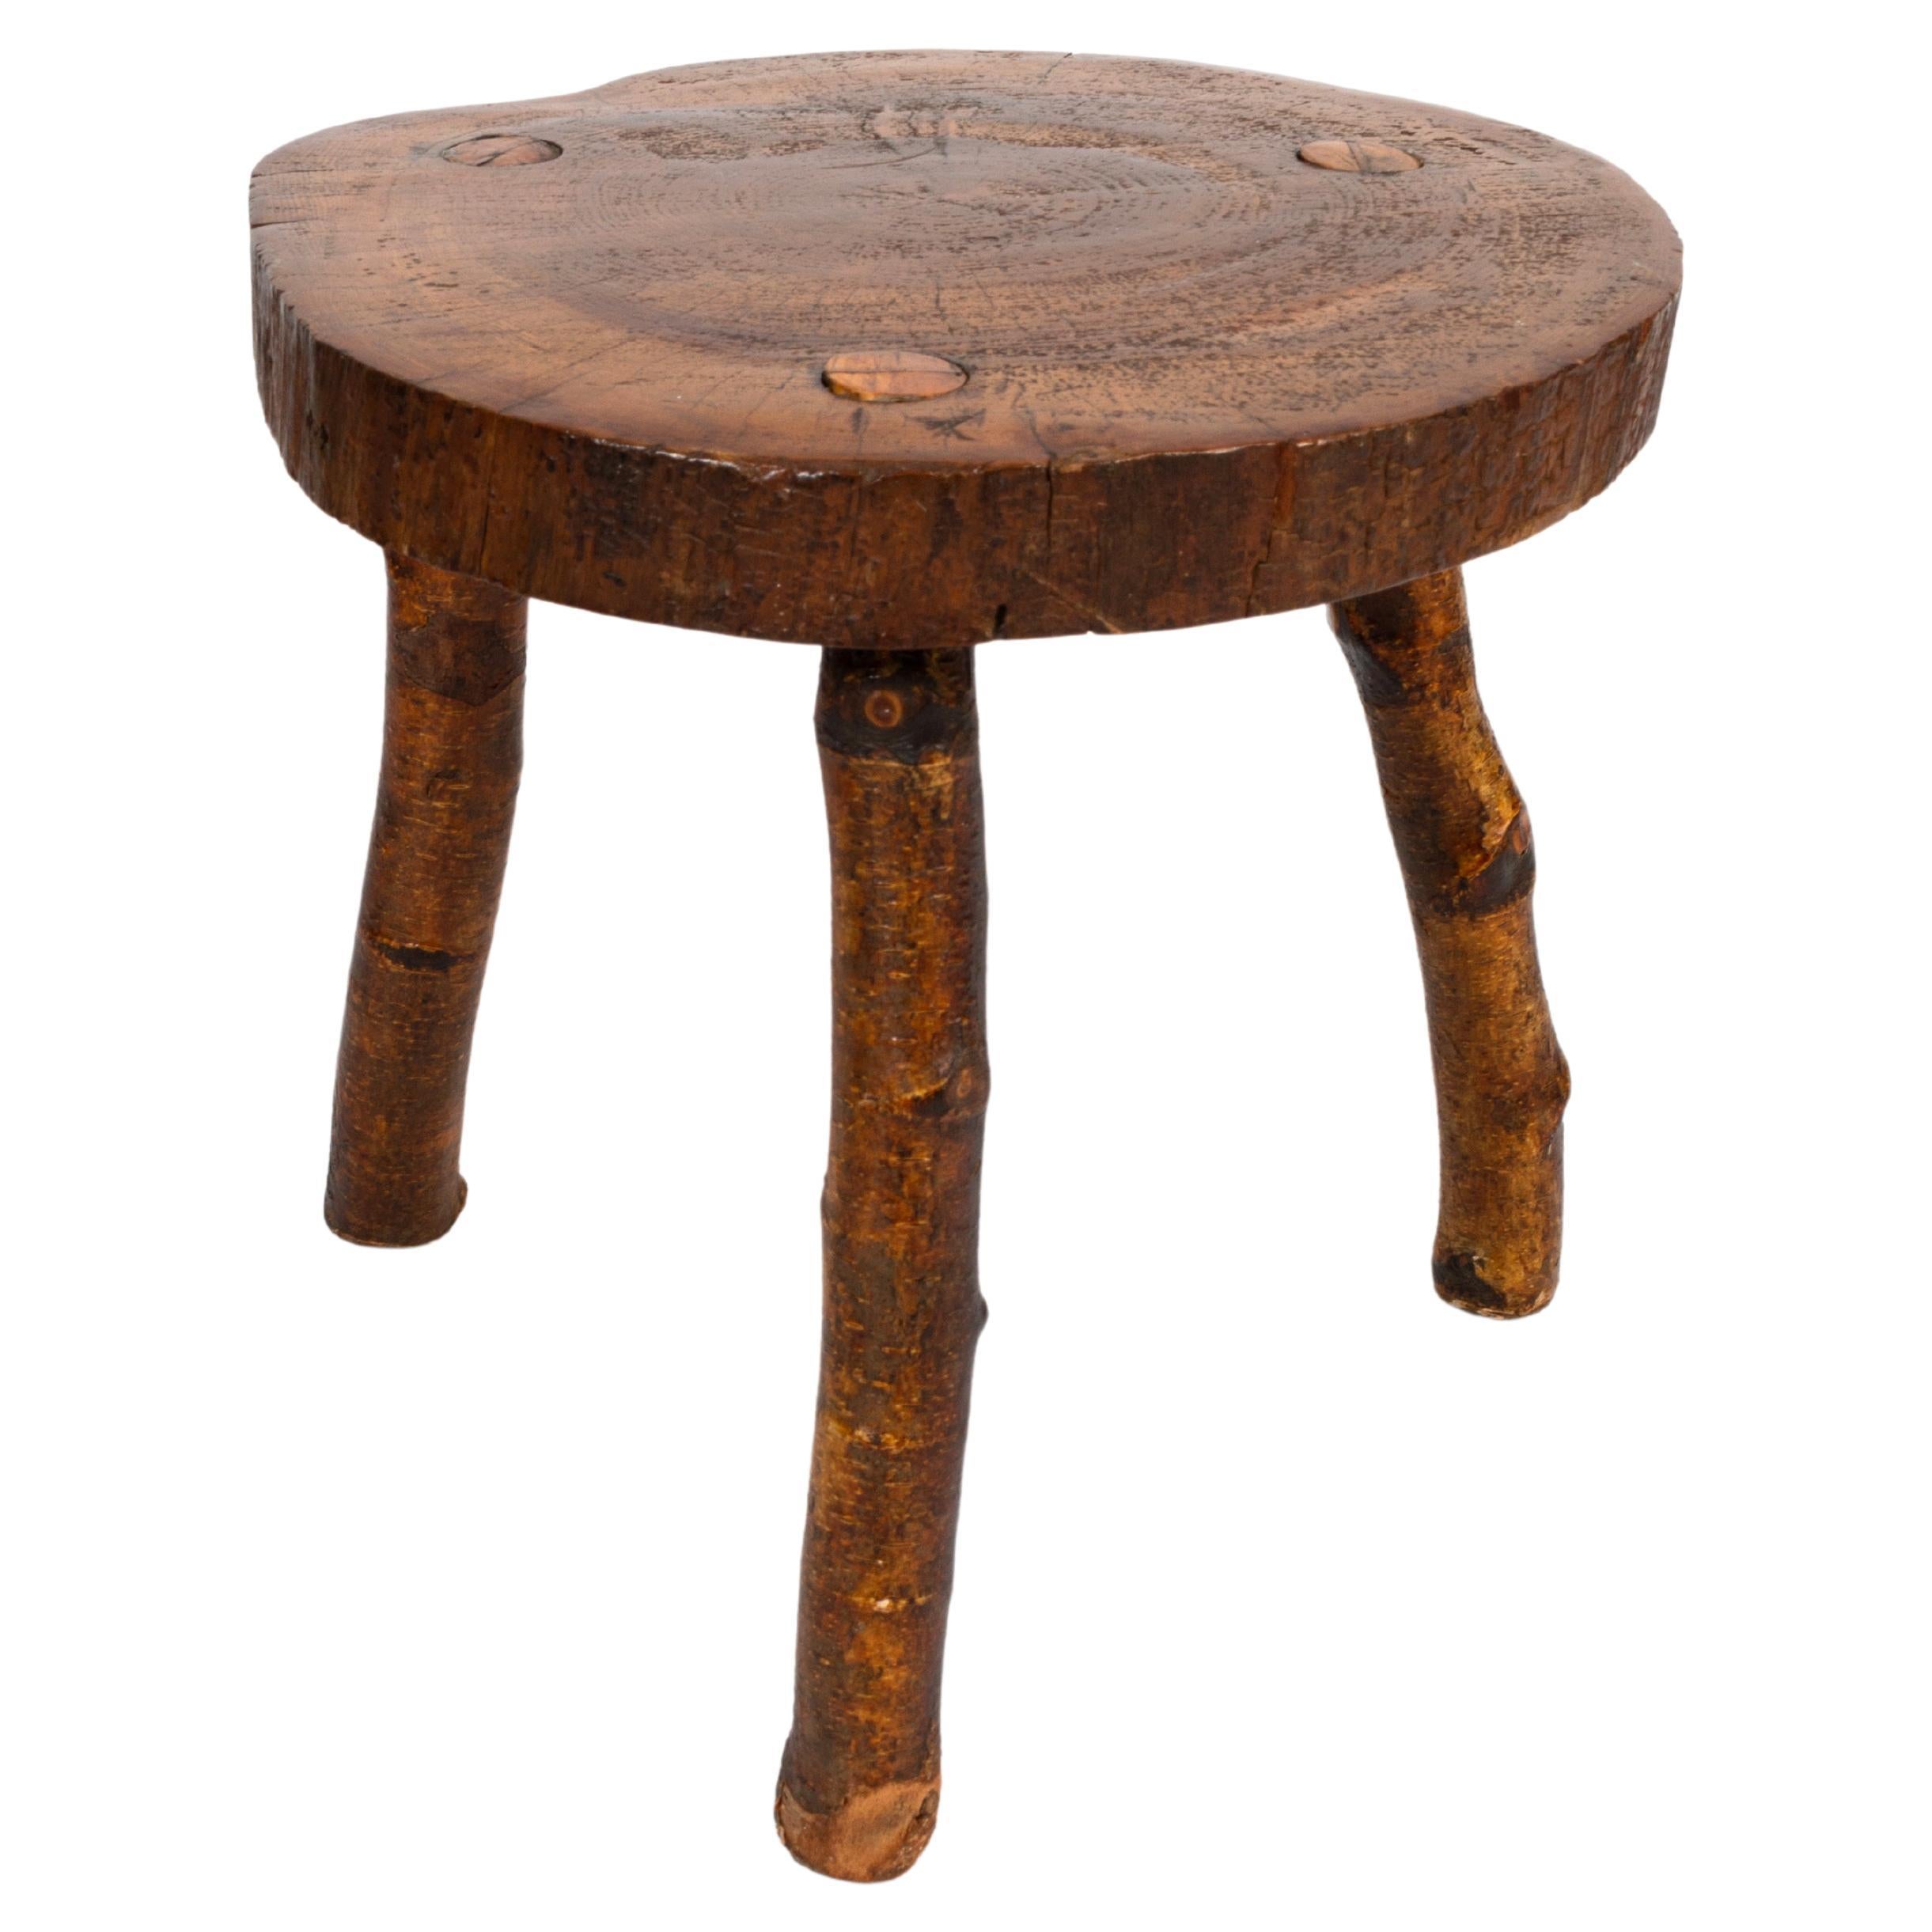 Antique English 19th Century Vernacular Cricket Table Side Table Stool